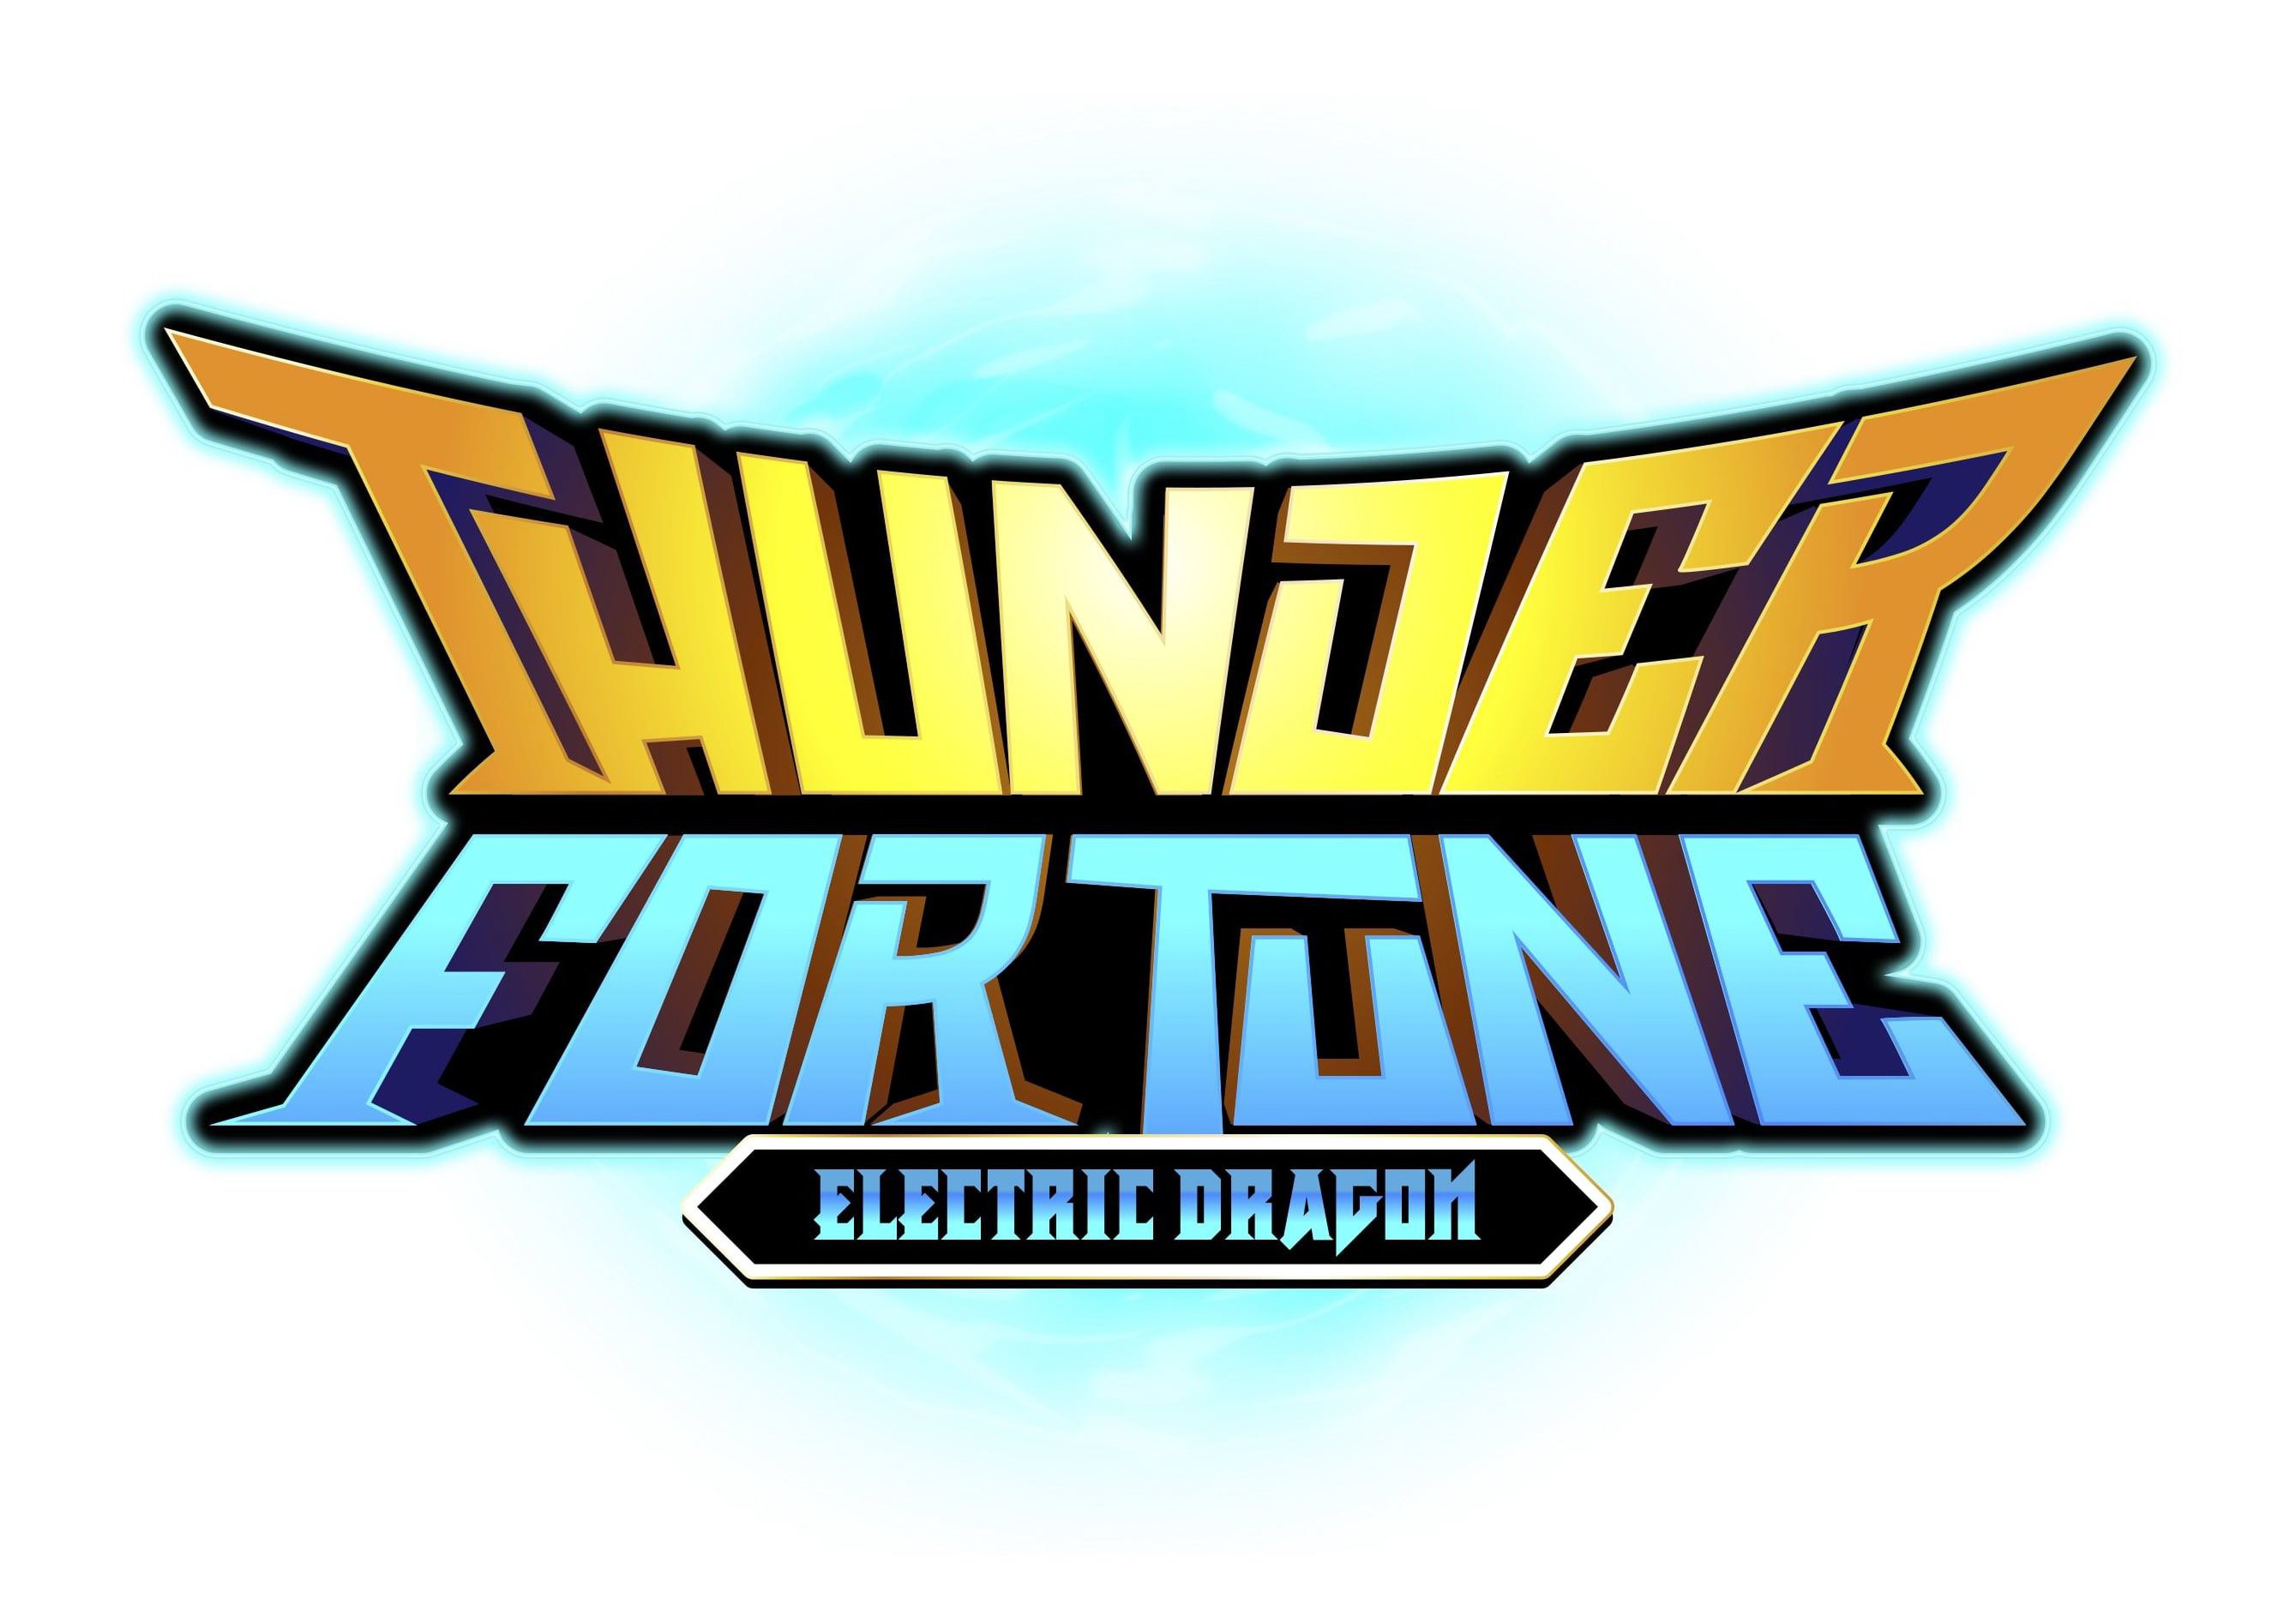  THUNDER FORTUNE ELECTRIC DRAGON